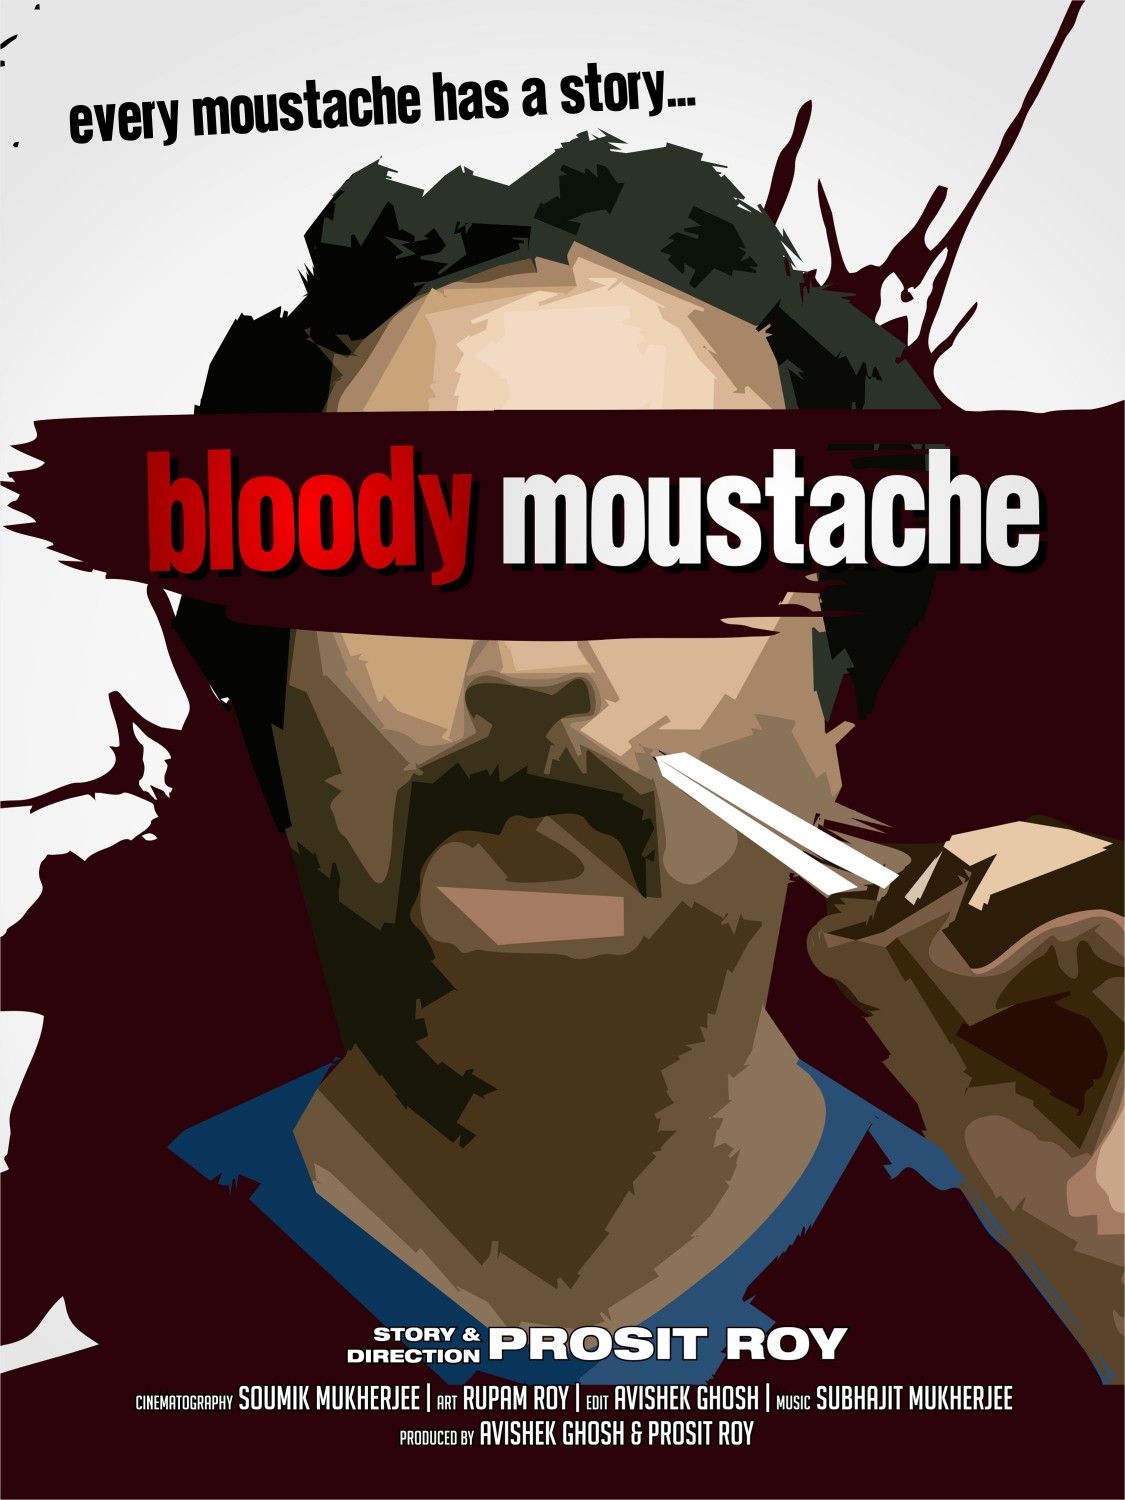 Extra Large Movie Poster Image for Bloody Moustache